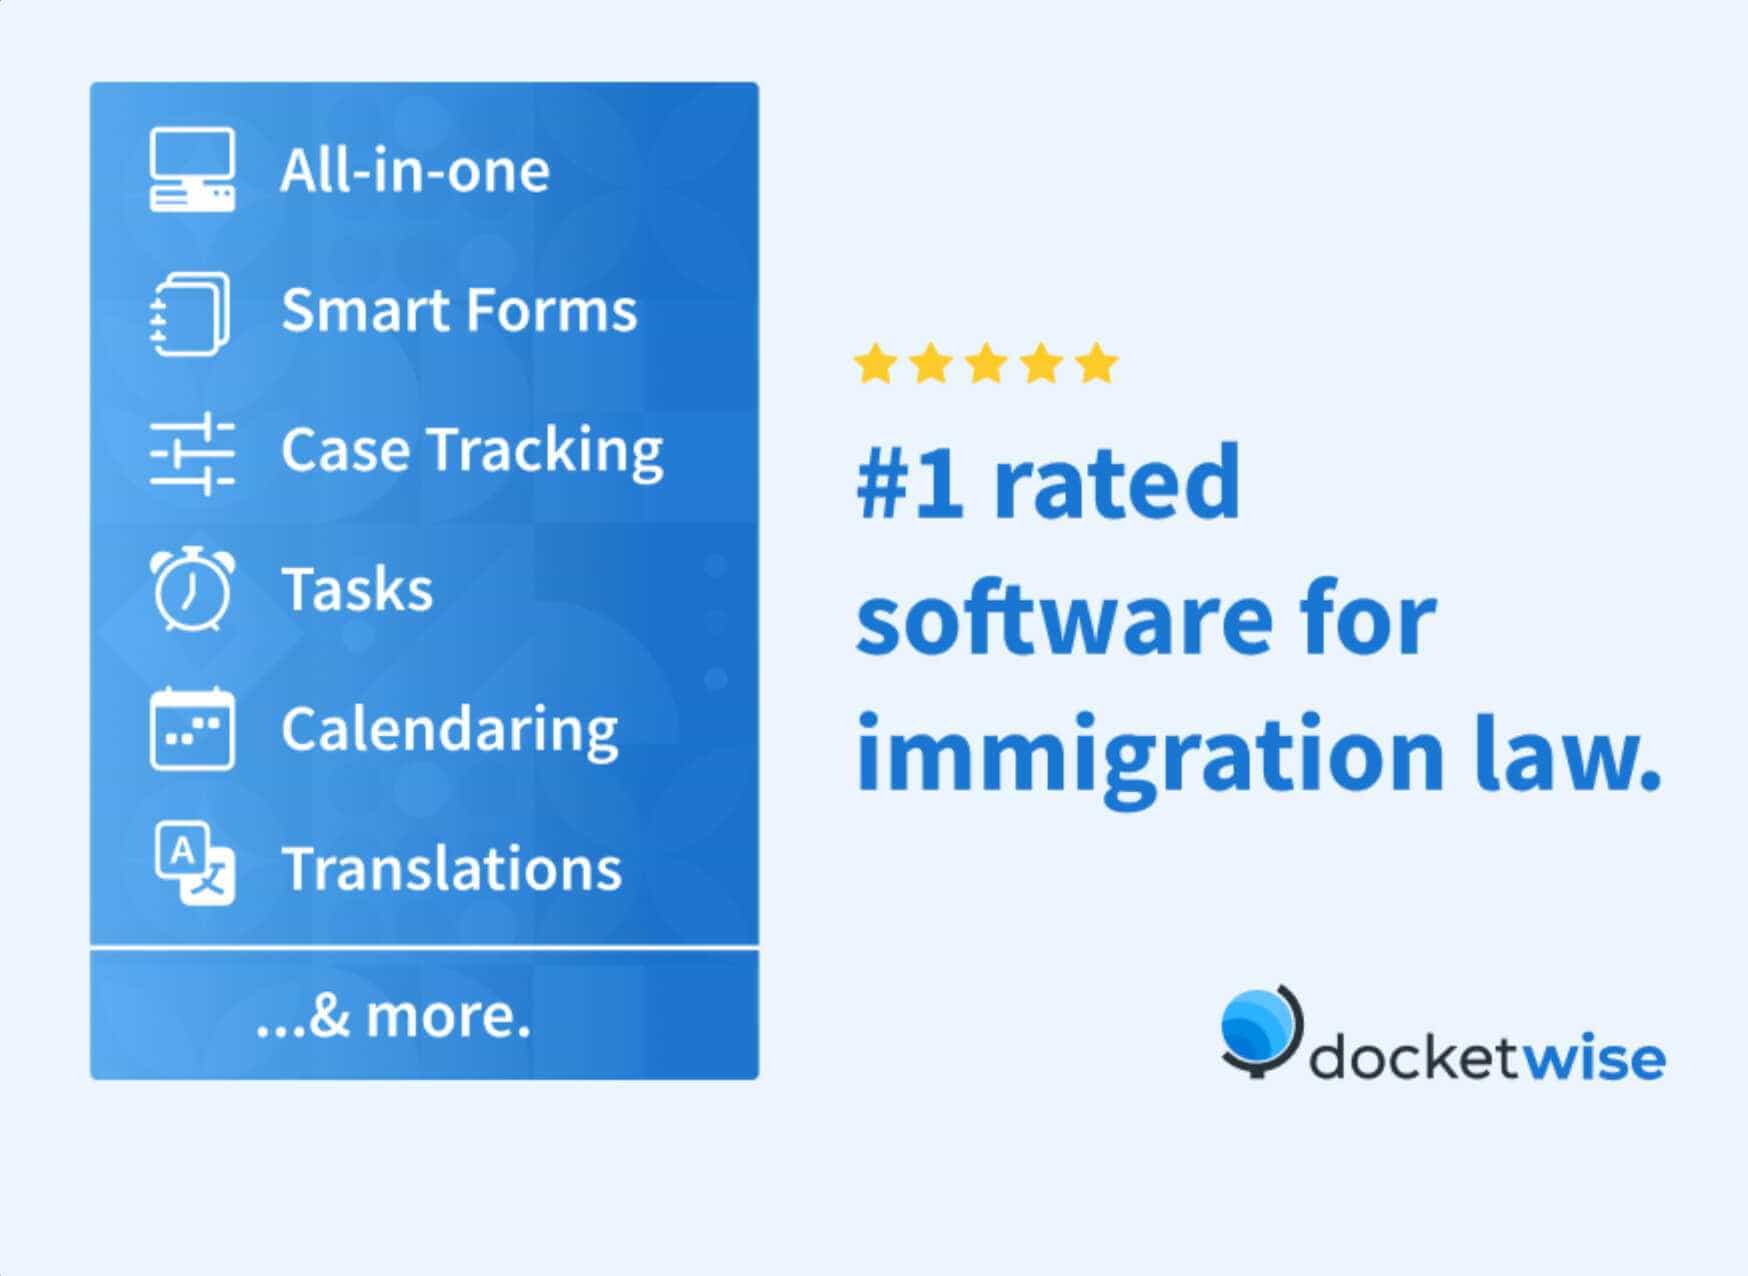 Docketwise application modules and beeing rated as #1 software for immigration law